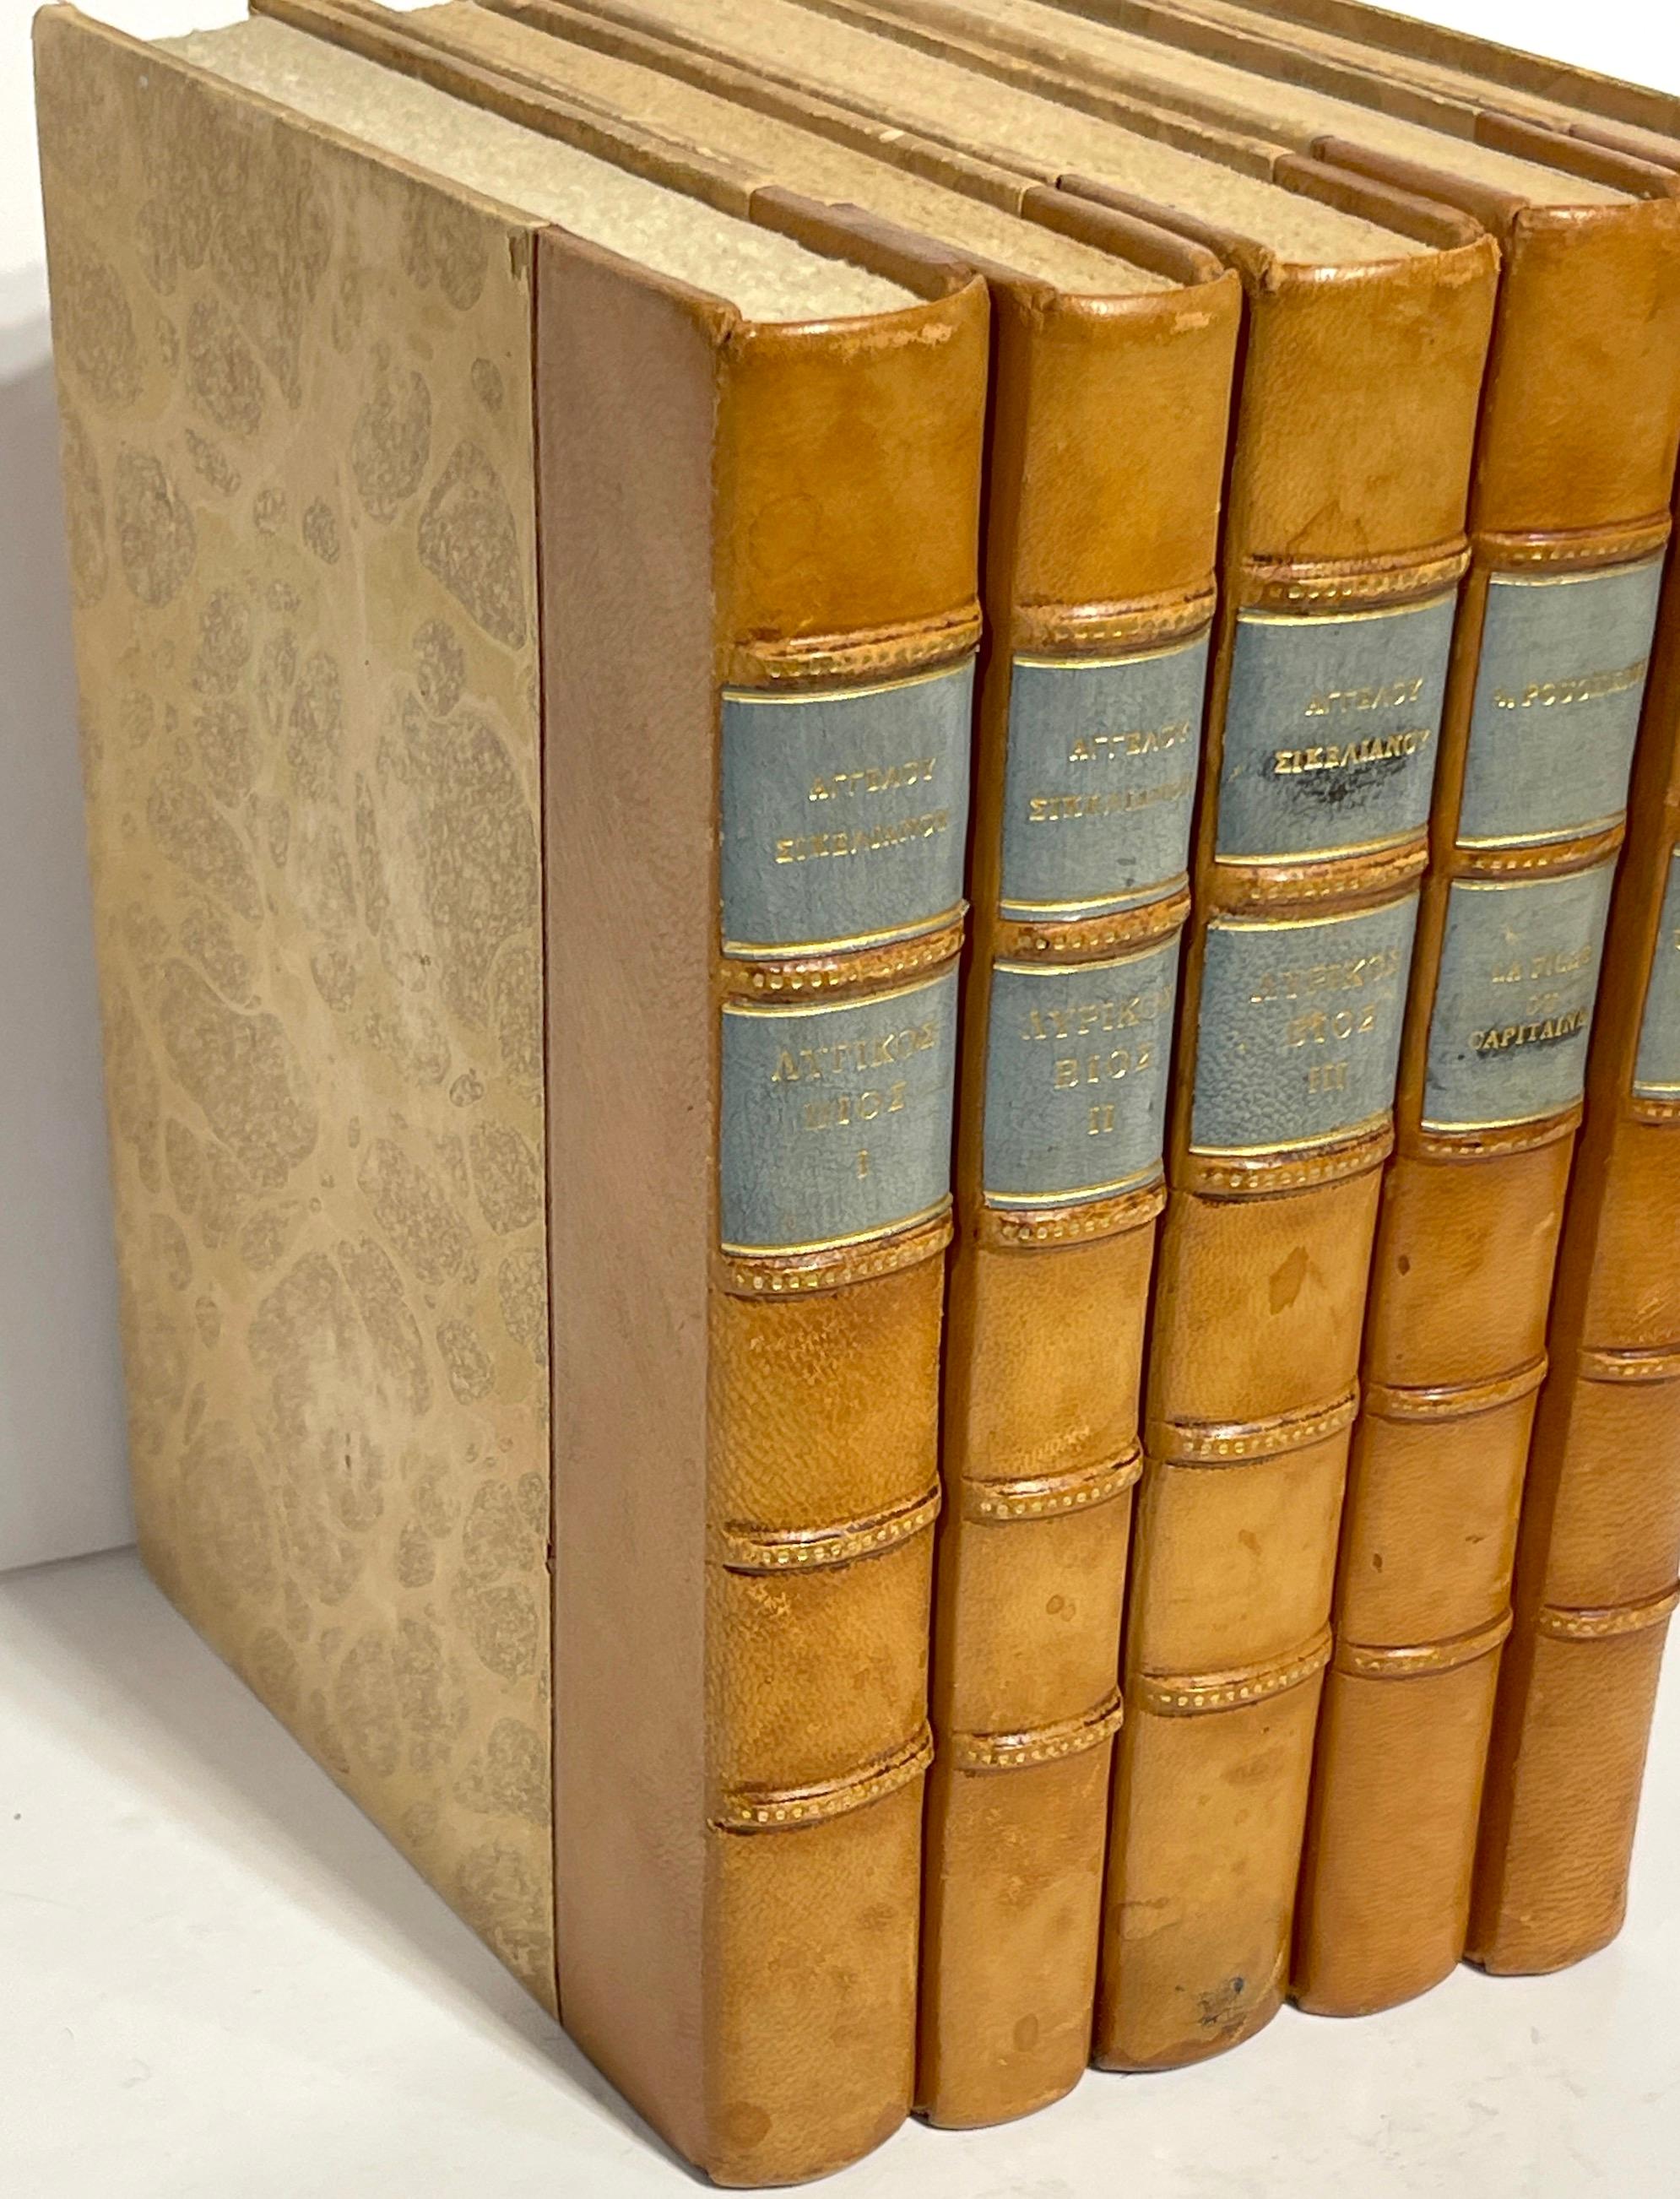 5 Antique Saddle Leather & Gilt Steel Grey Bound Gilt Theatrical Books in Greek In Fair Condition For Sale In West Palm Beach, FL